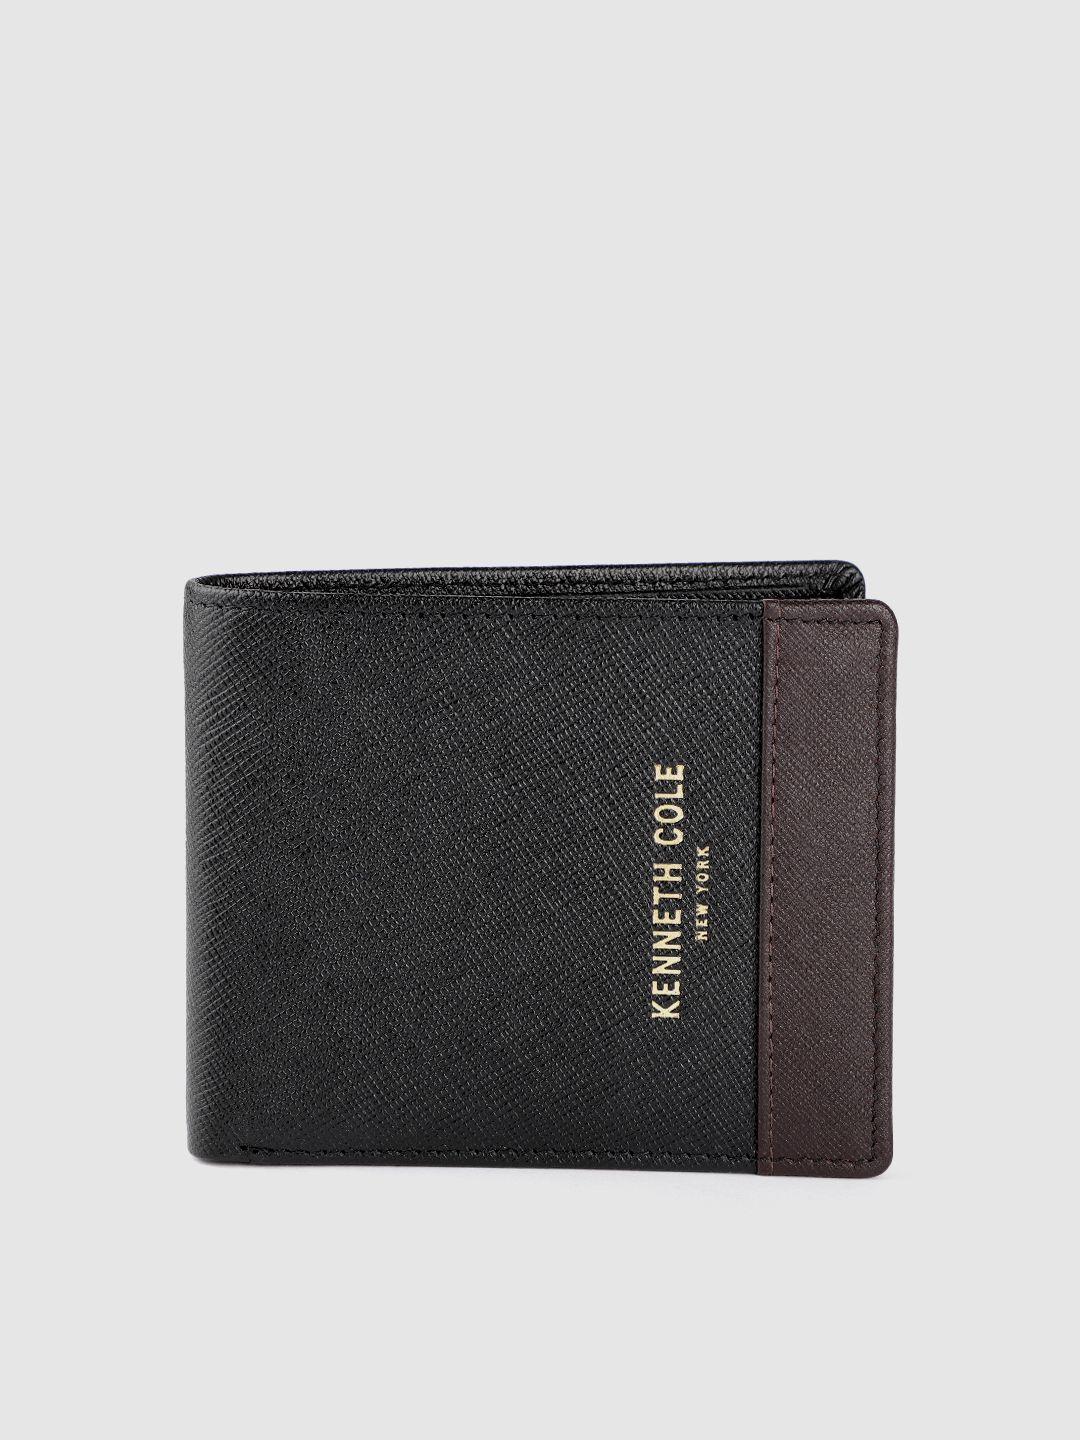 kenneth-cole-men-colourblocked-leather-two-fold-wallet